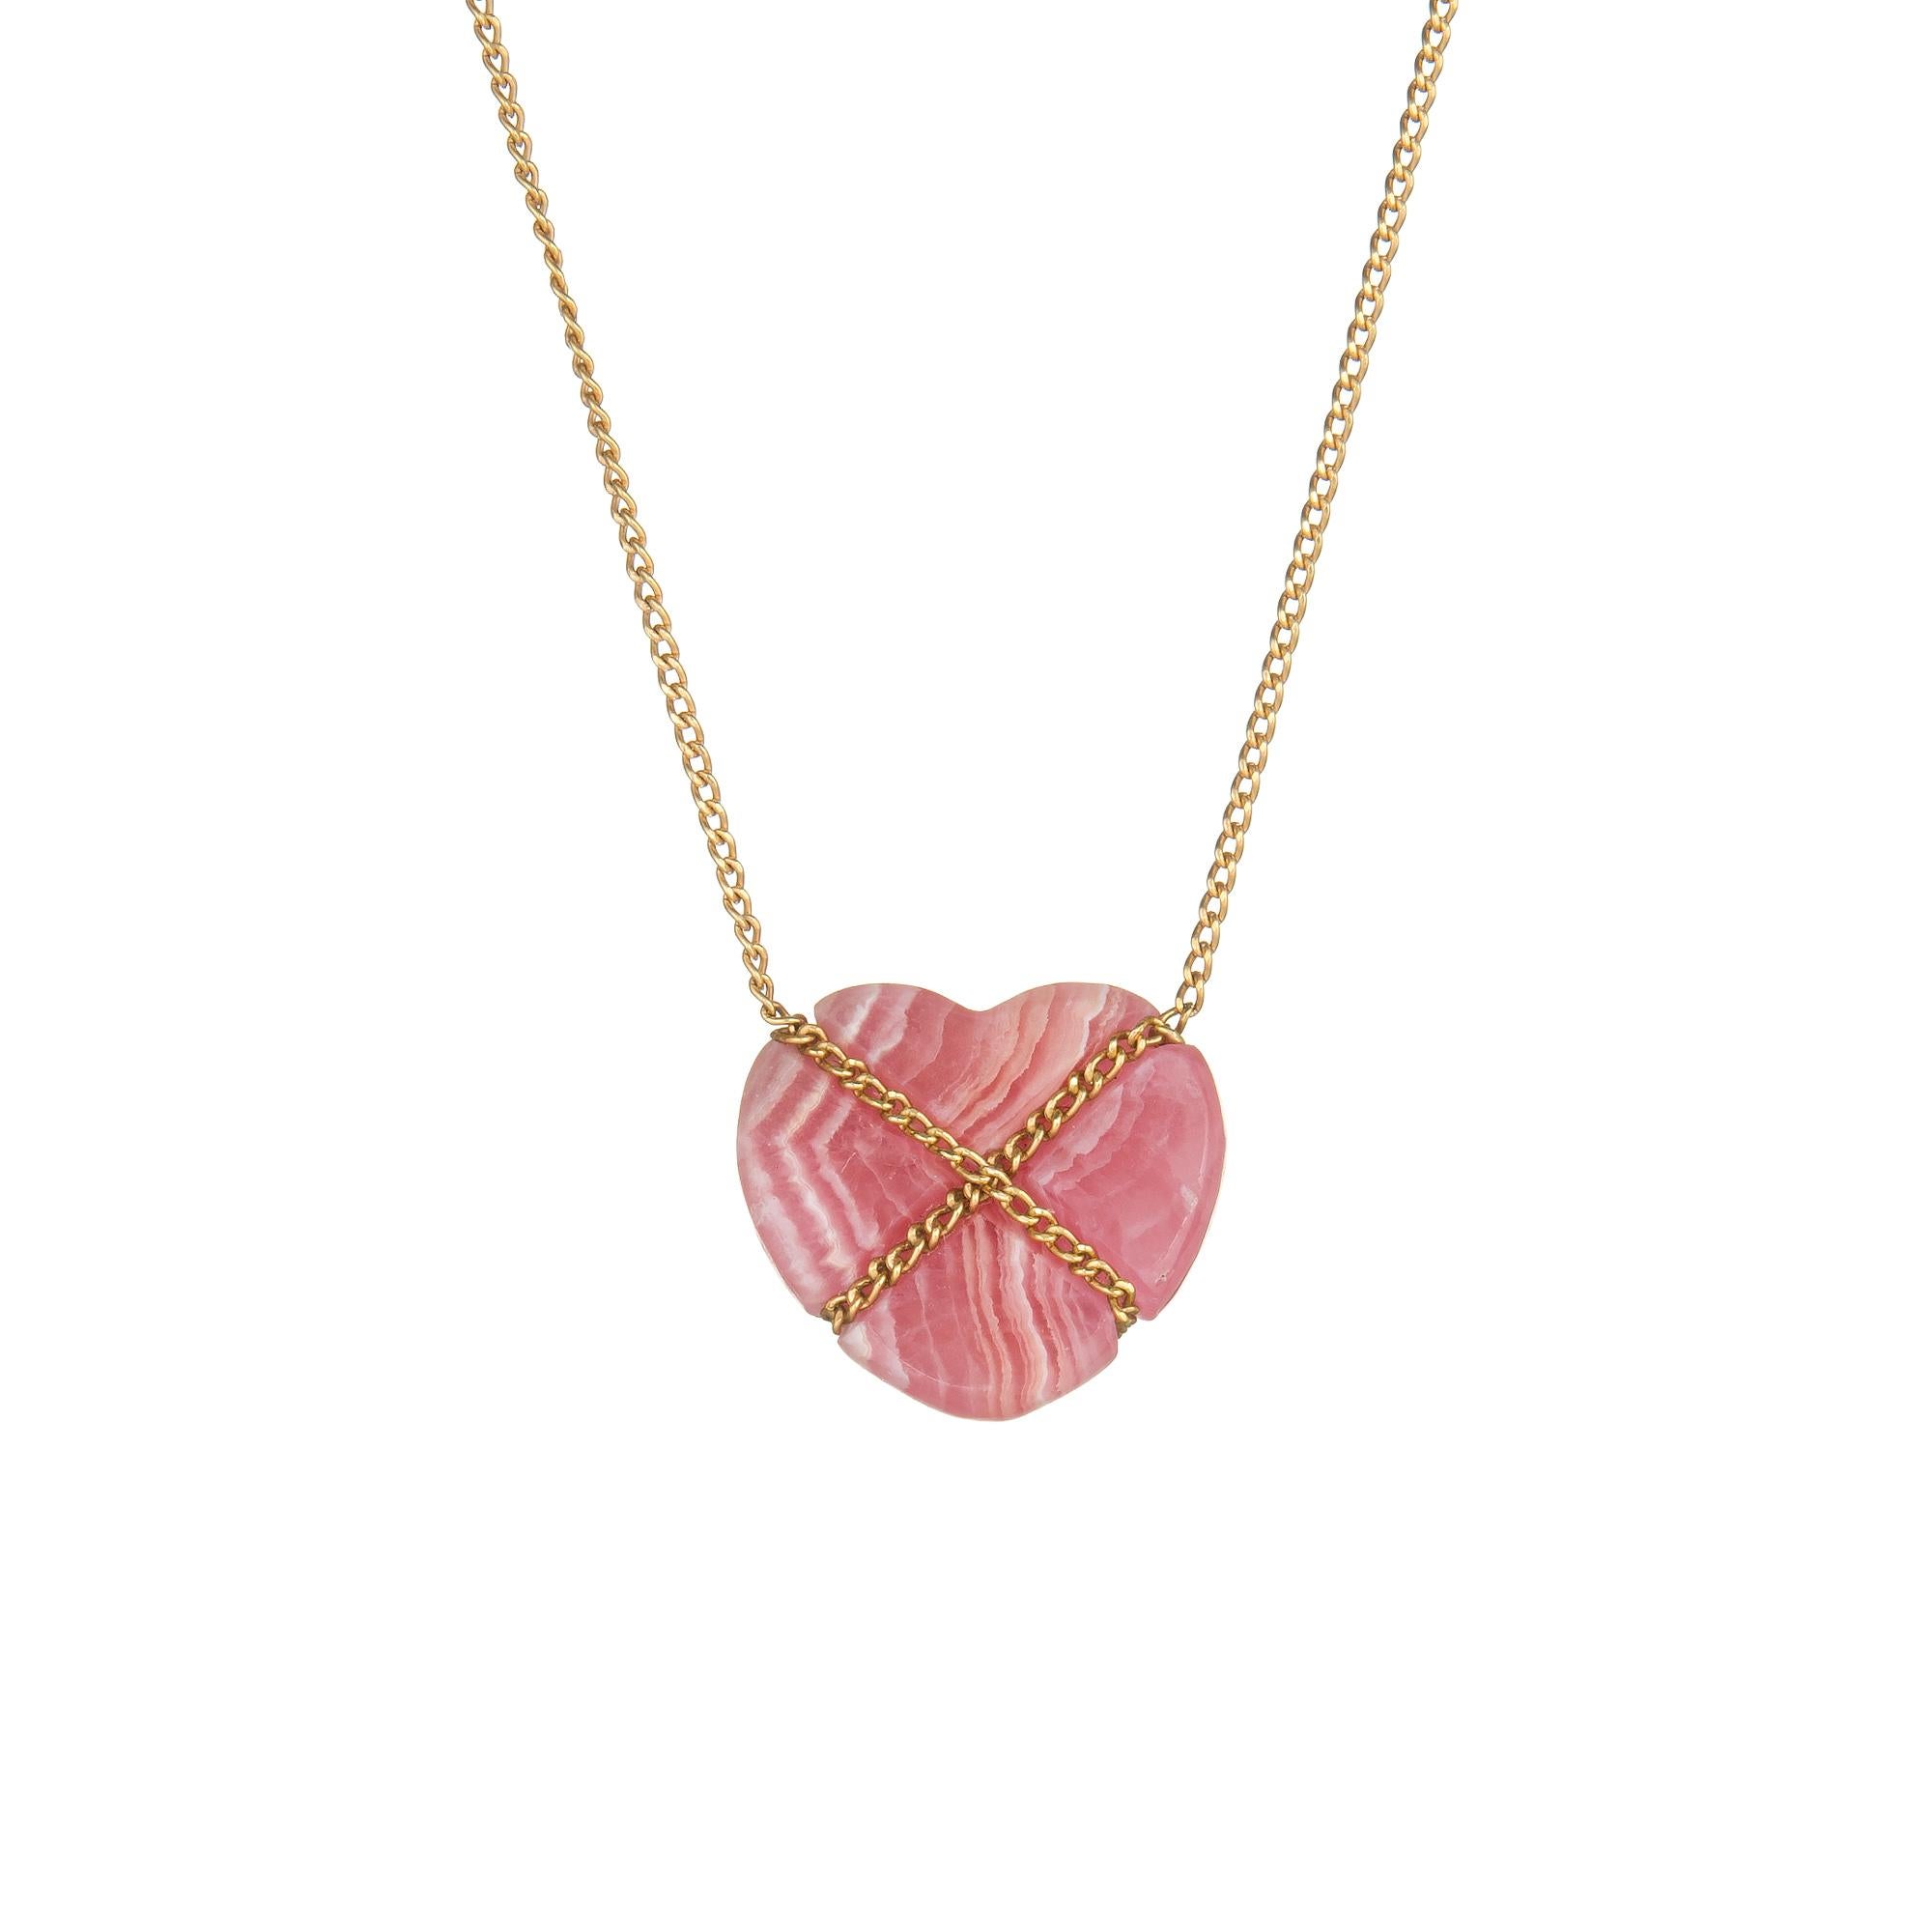 Elegant and finely detailed vintage Tiffany & Co rhodochrosite Cross My Heart necklace, crafted in 18 karat yellow gold.  

Rhodochrosite is set into the necklace and measures 14mm x 13mm. The stone is in excellent condition and free of cracks or